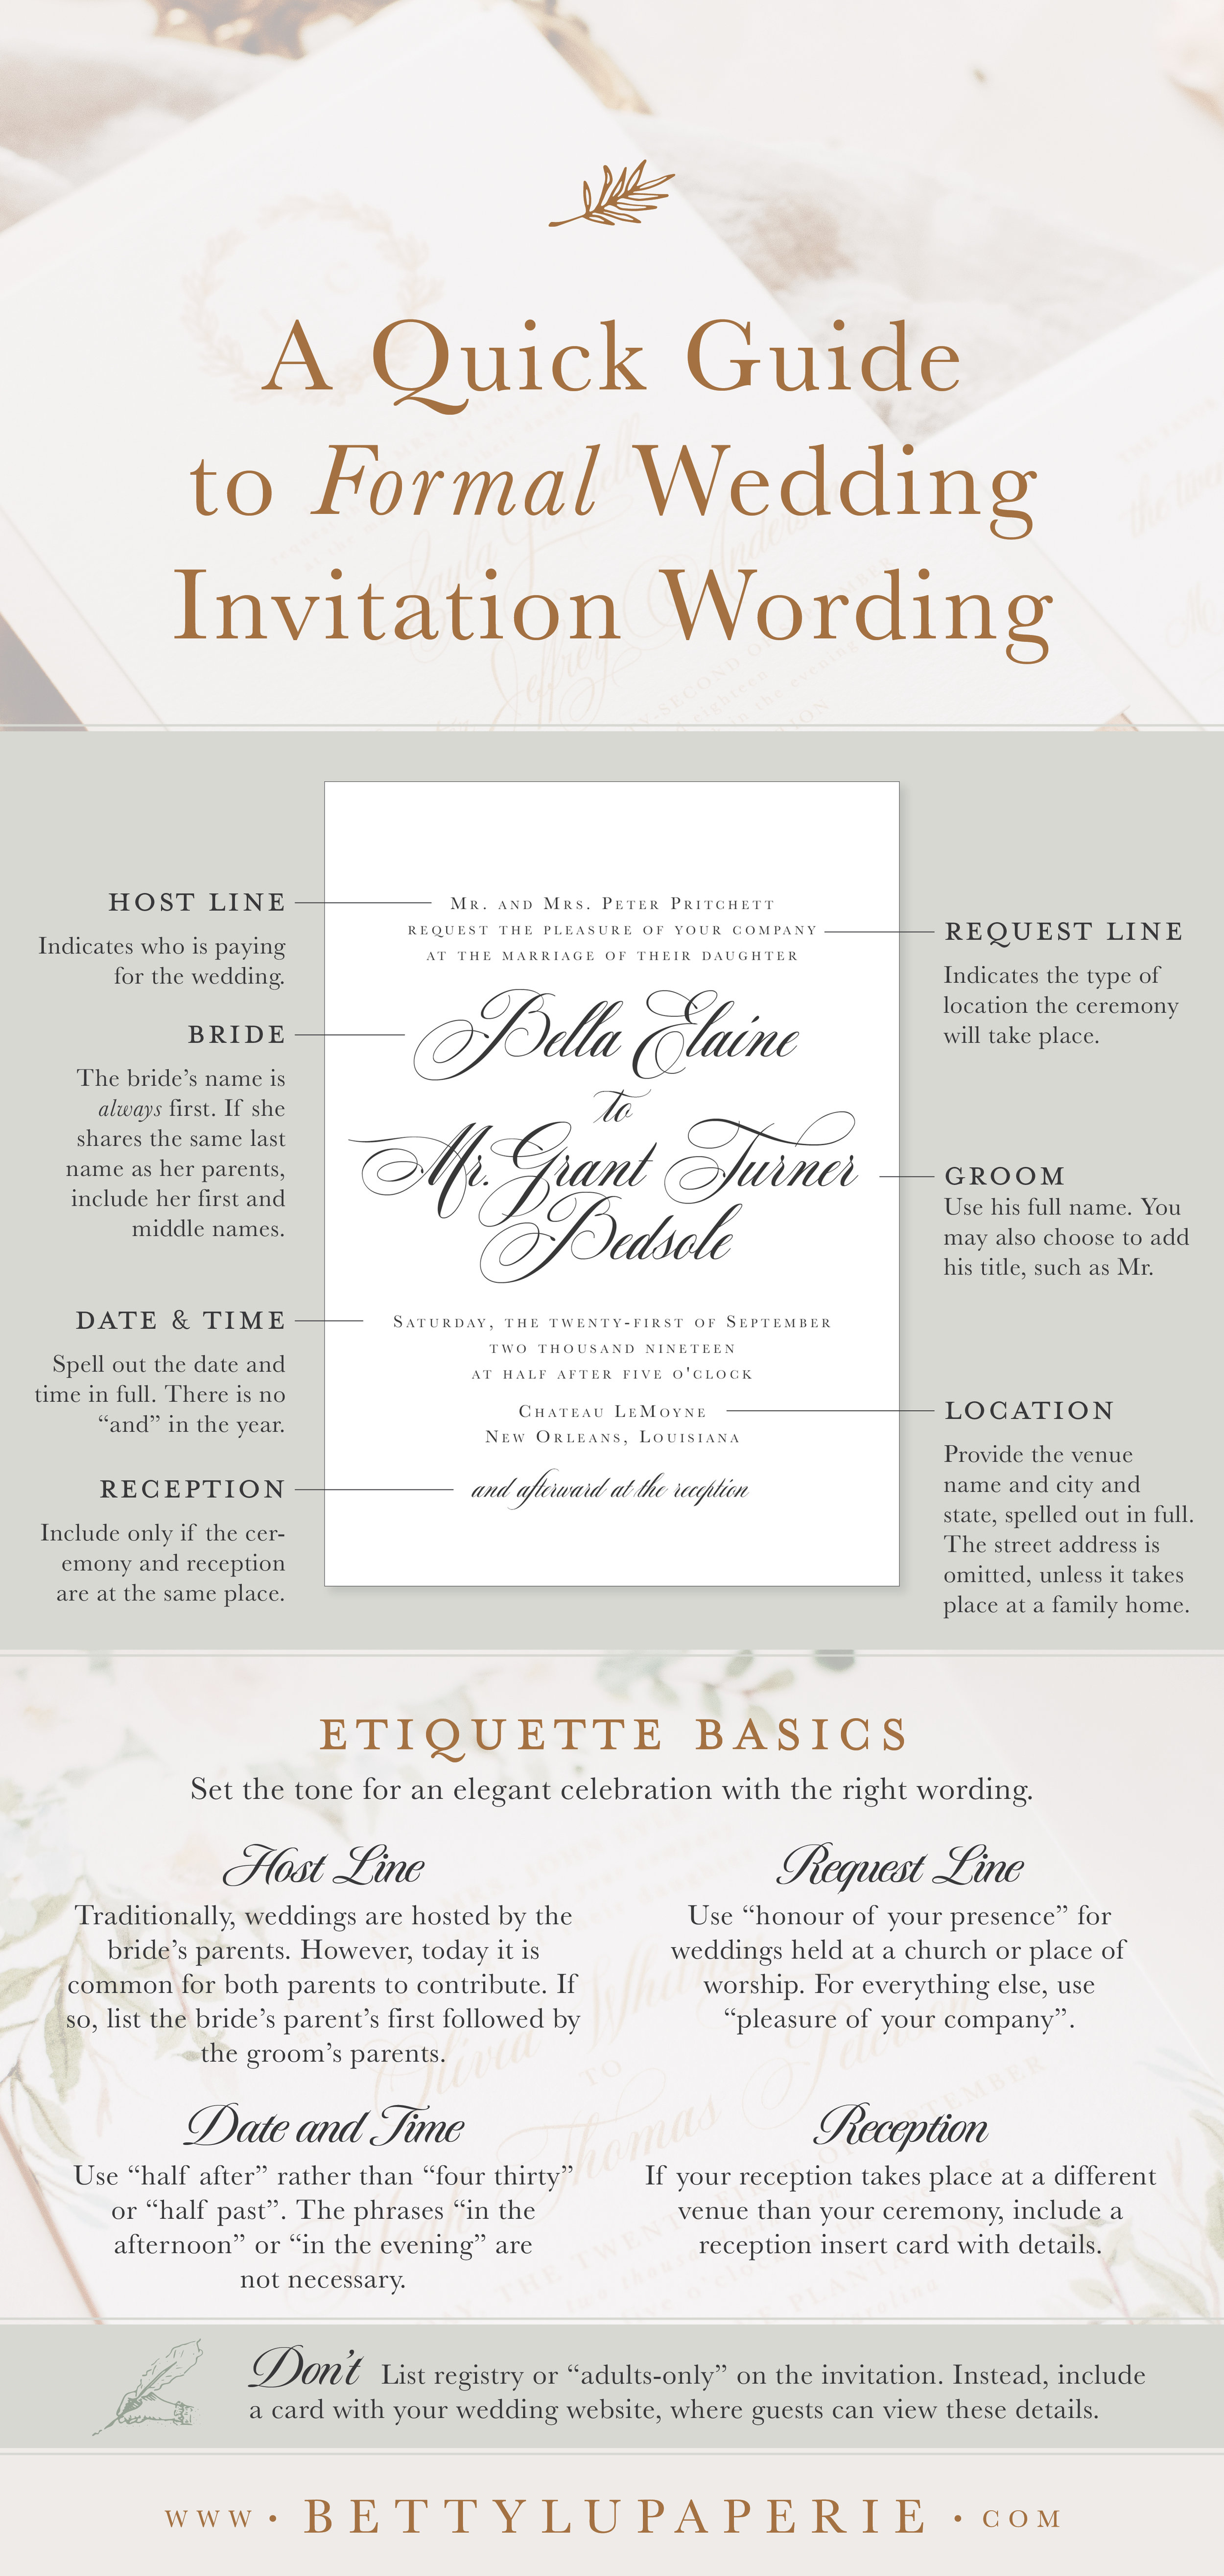 Formal Wedding Invitation Wording — Floral Wedding Invitations from Betty Lu Paperie